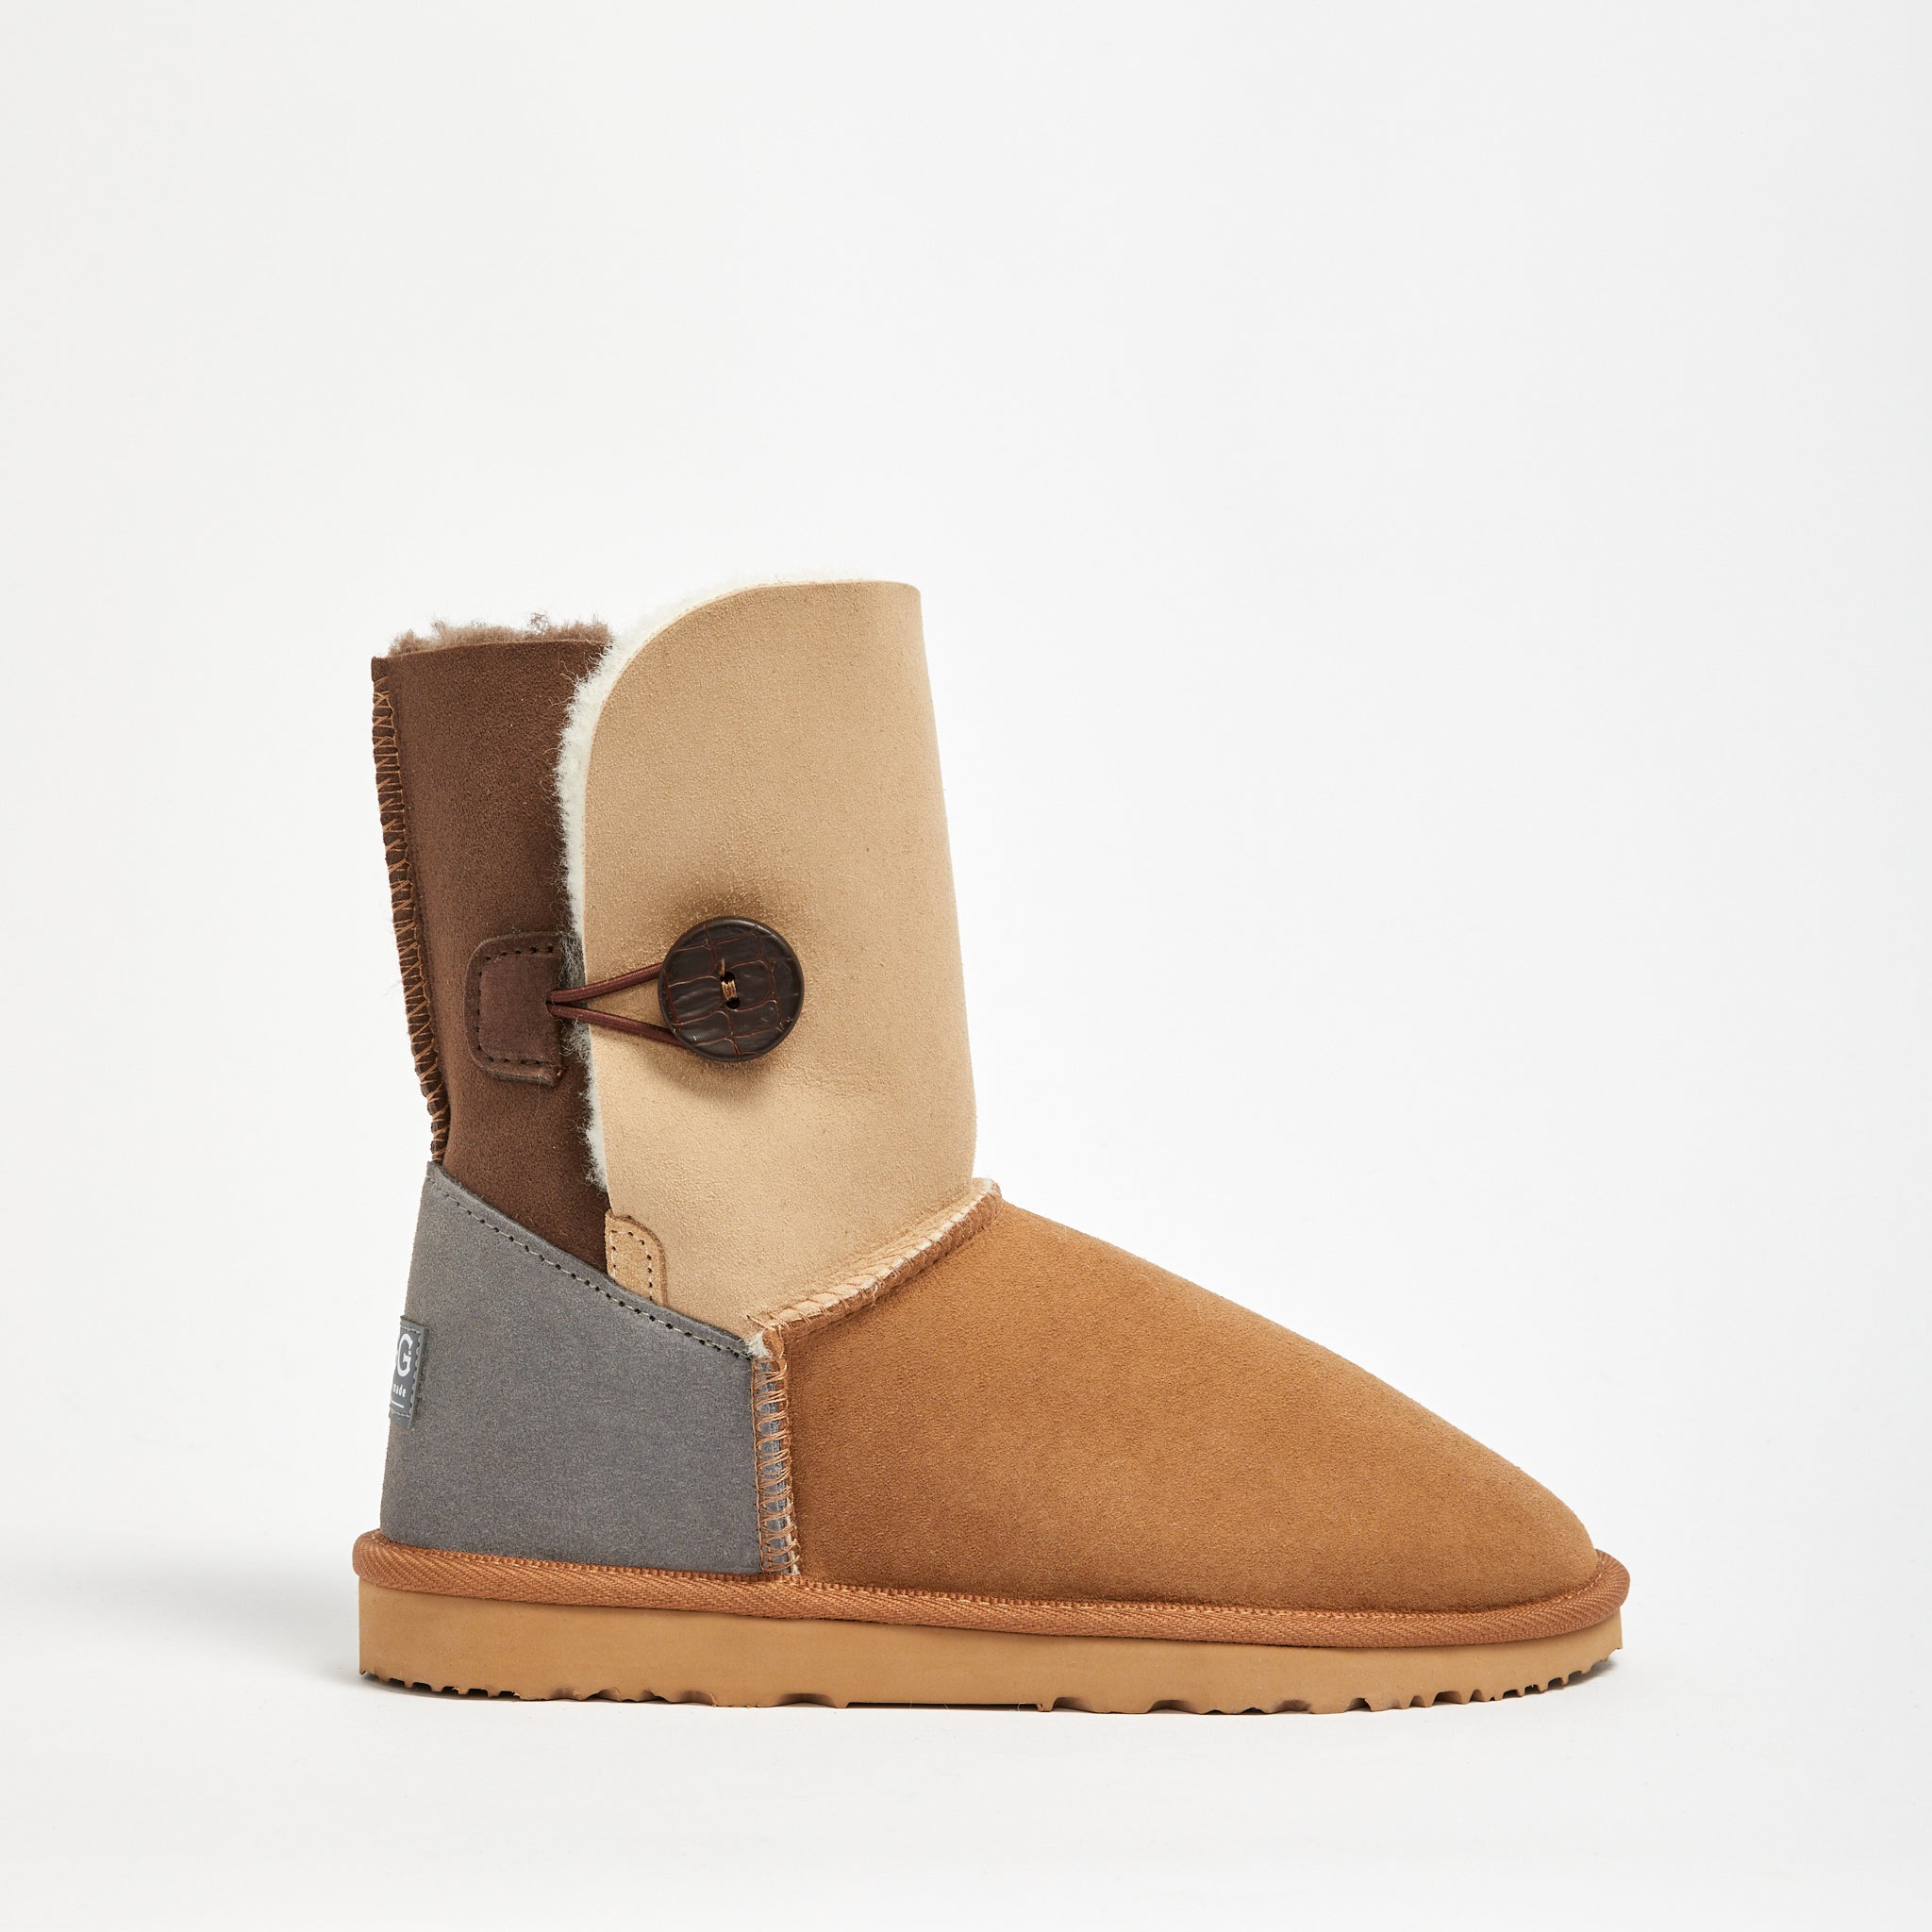 Men's Burleigh Button Tricolour Mid | UGG Since 1974 | Reviews on Judge.me